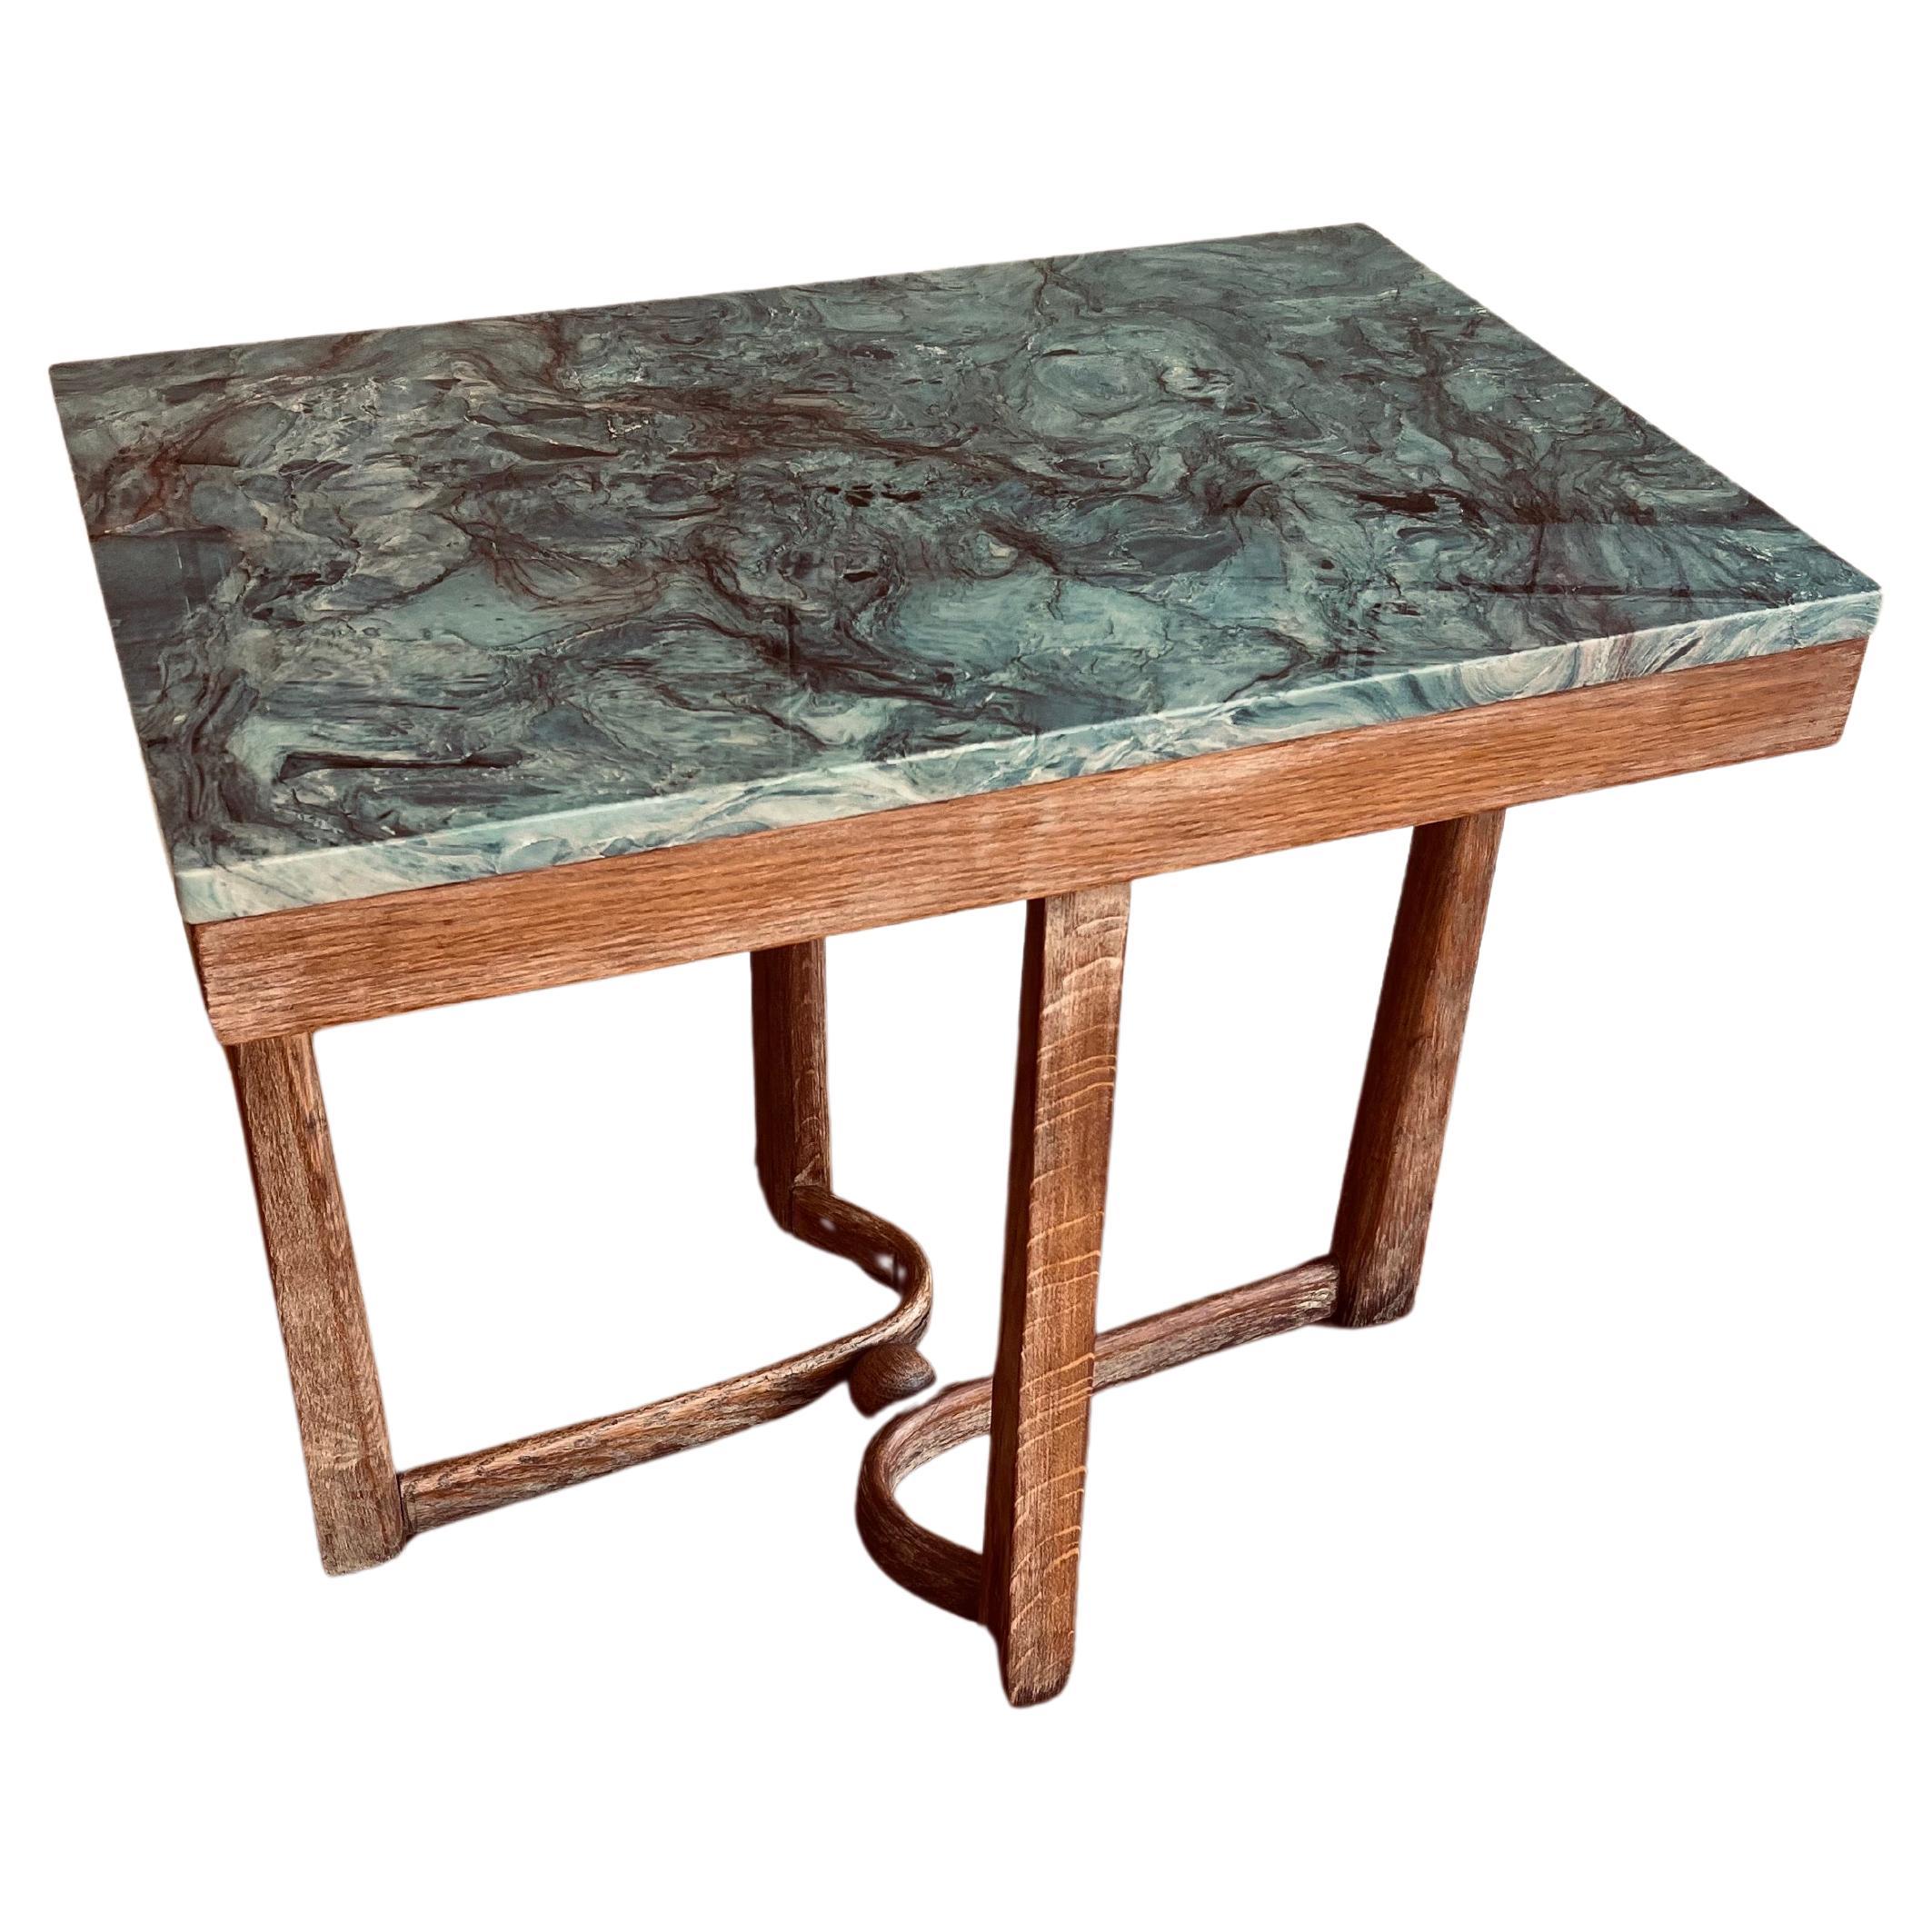 beautiful elegant rare end cocktail table, circa 1940's solid tiger oak frame with Italian green marble top nice decorative base with ball in the middle k, rare and unique design.